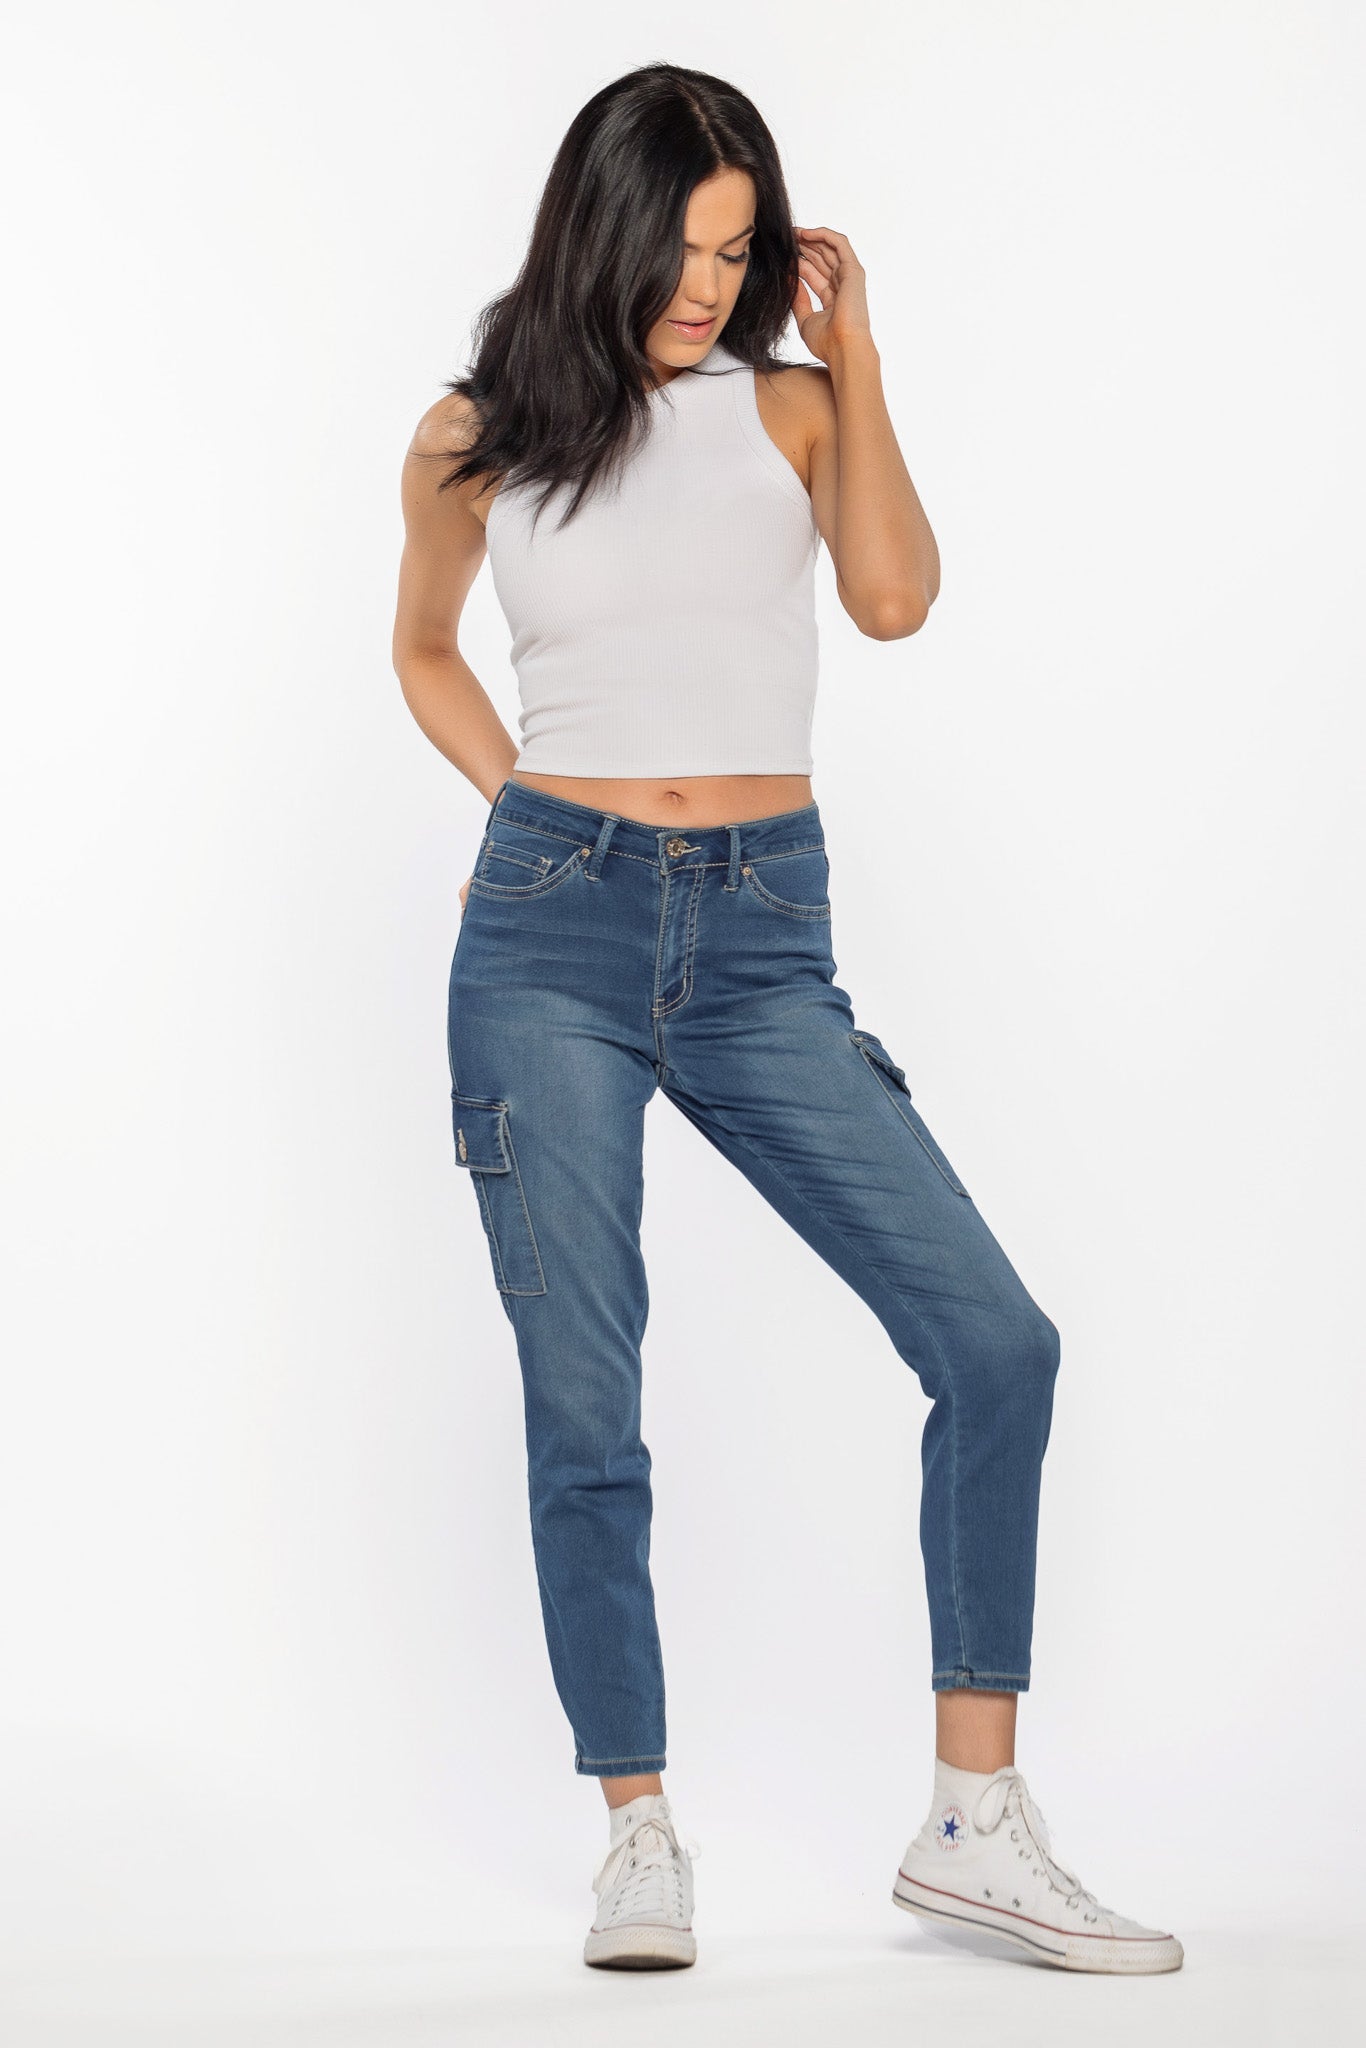 YMI Jeans - The secret is out! 🤫 Introducing our newest collection by YMI  Jeans: Secrets With Love 💕 #secretswithlove Link to shop